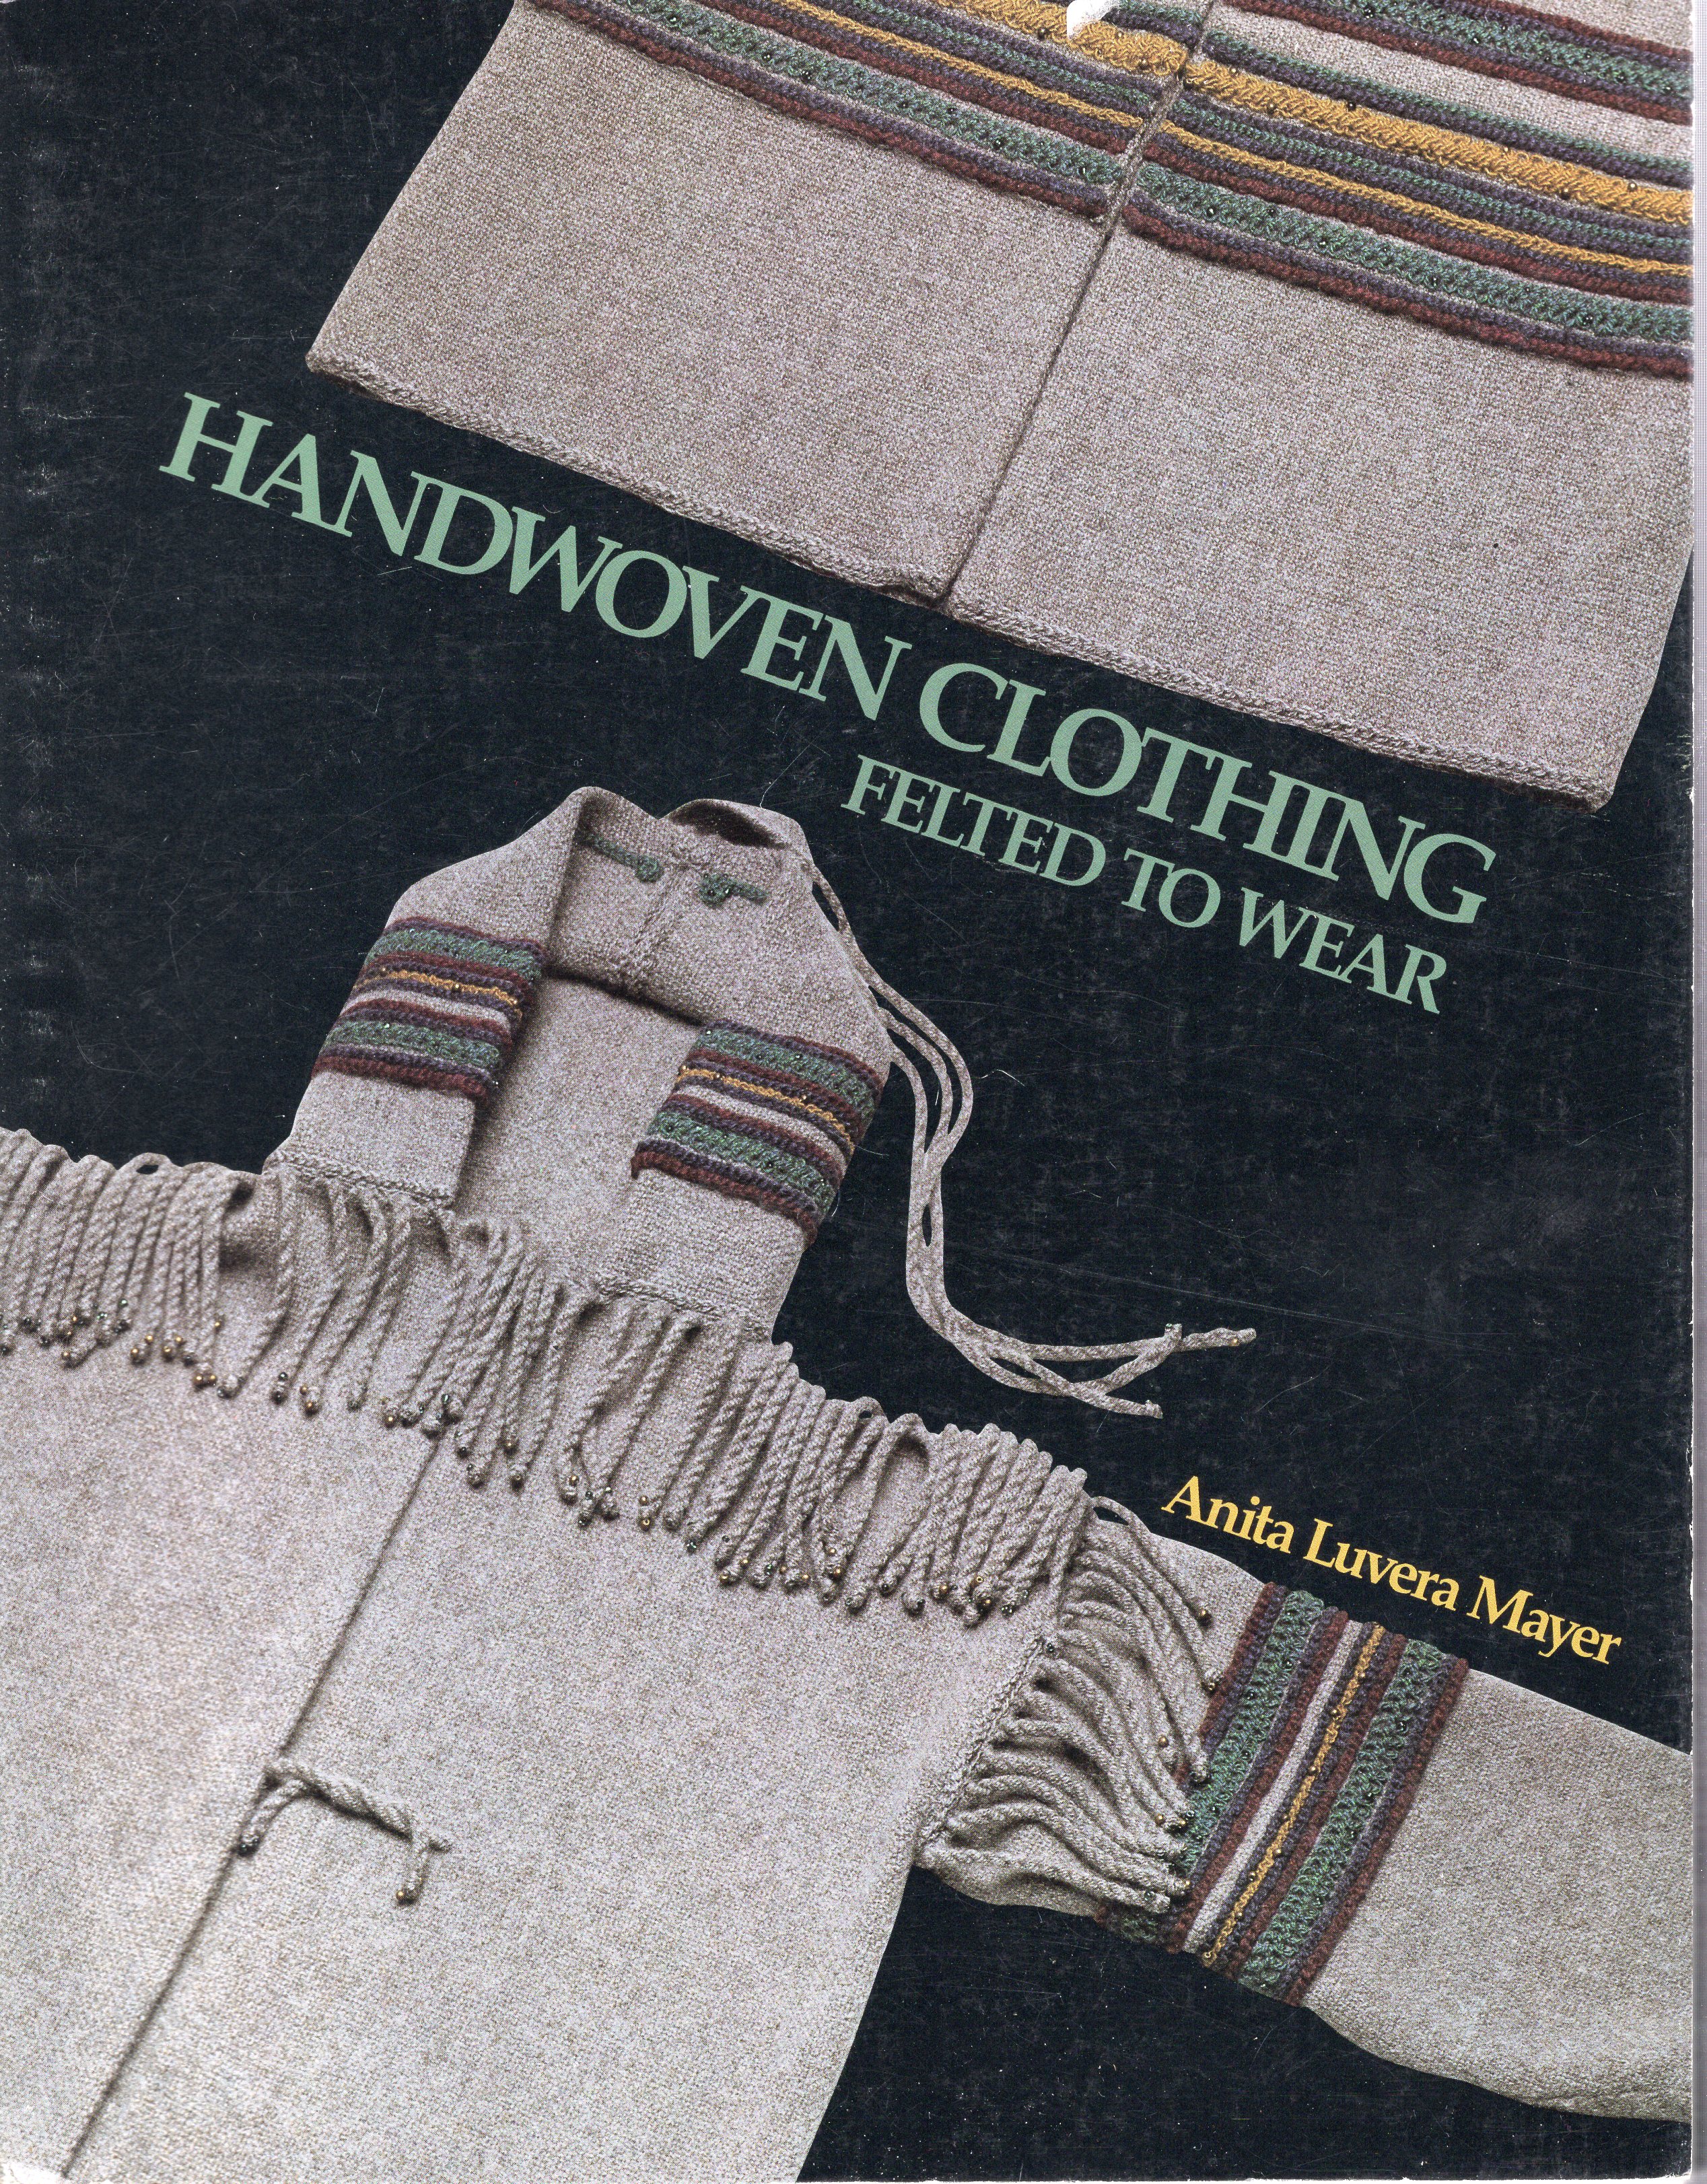 Image for Handwoven Clothing: felted to wear